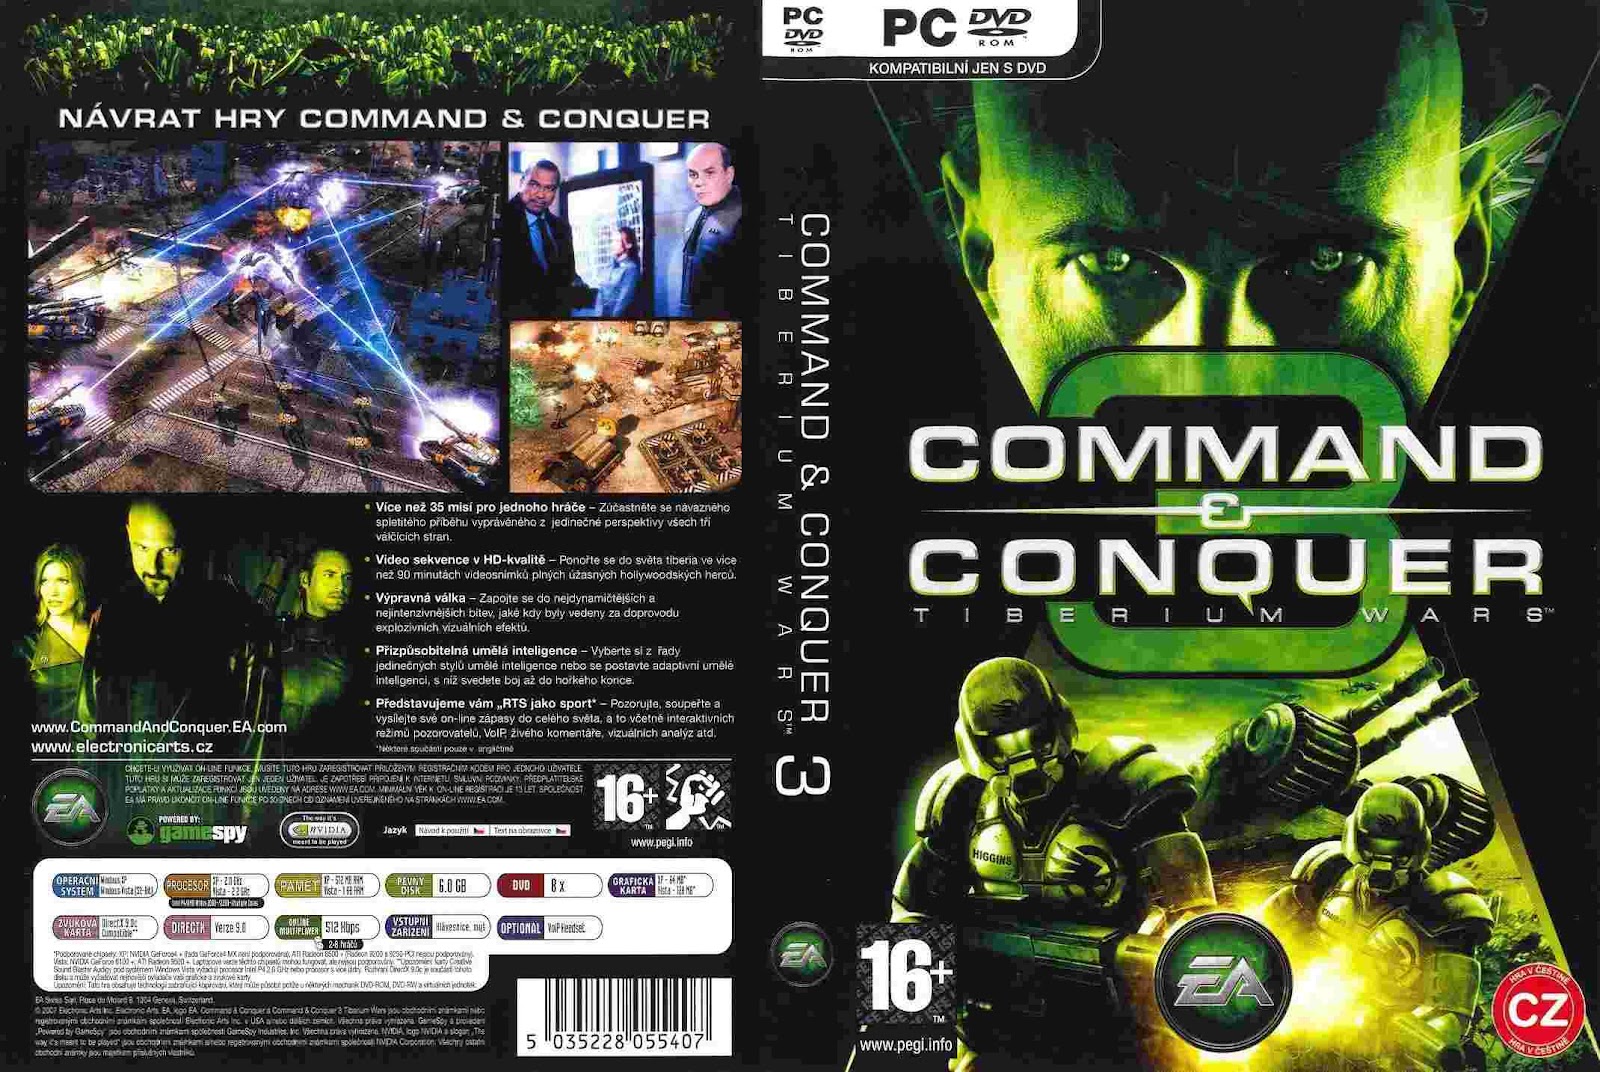 Command returned 1. Command and Conquer Tiberium Wars обложка. Command and Conquer 3 обложка. Command & Conquer 3: Tiberium Wars Electronic Arts. Command Conquer 3 Tiberium Wars обложка.